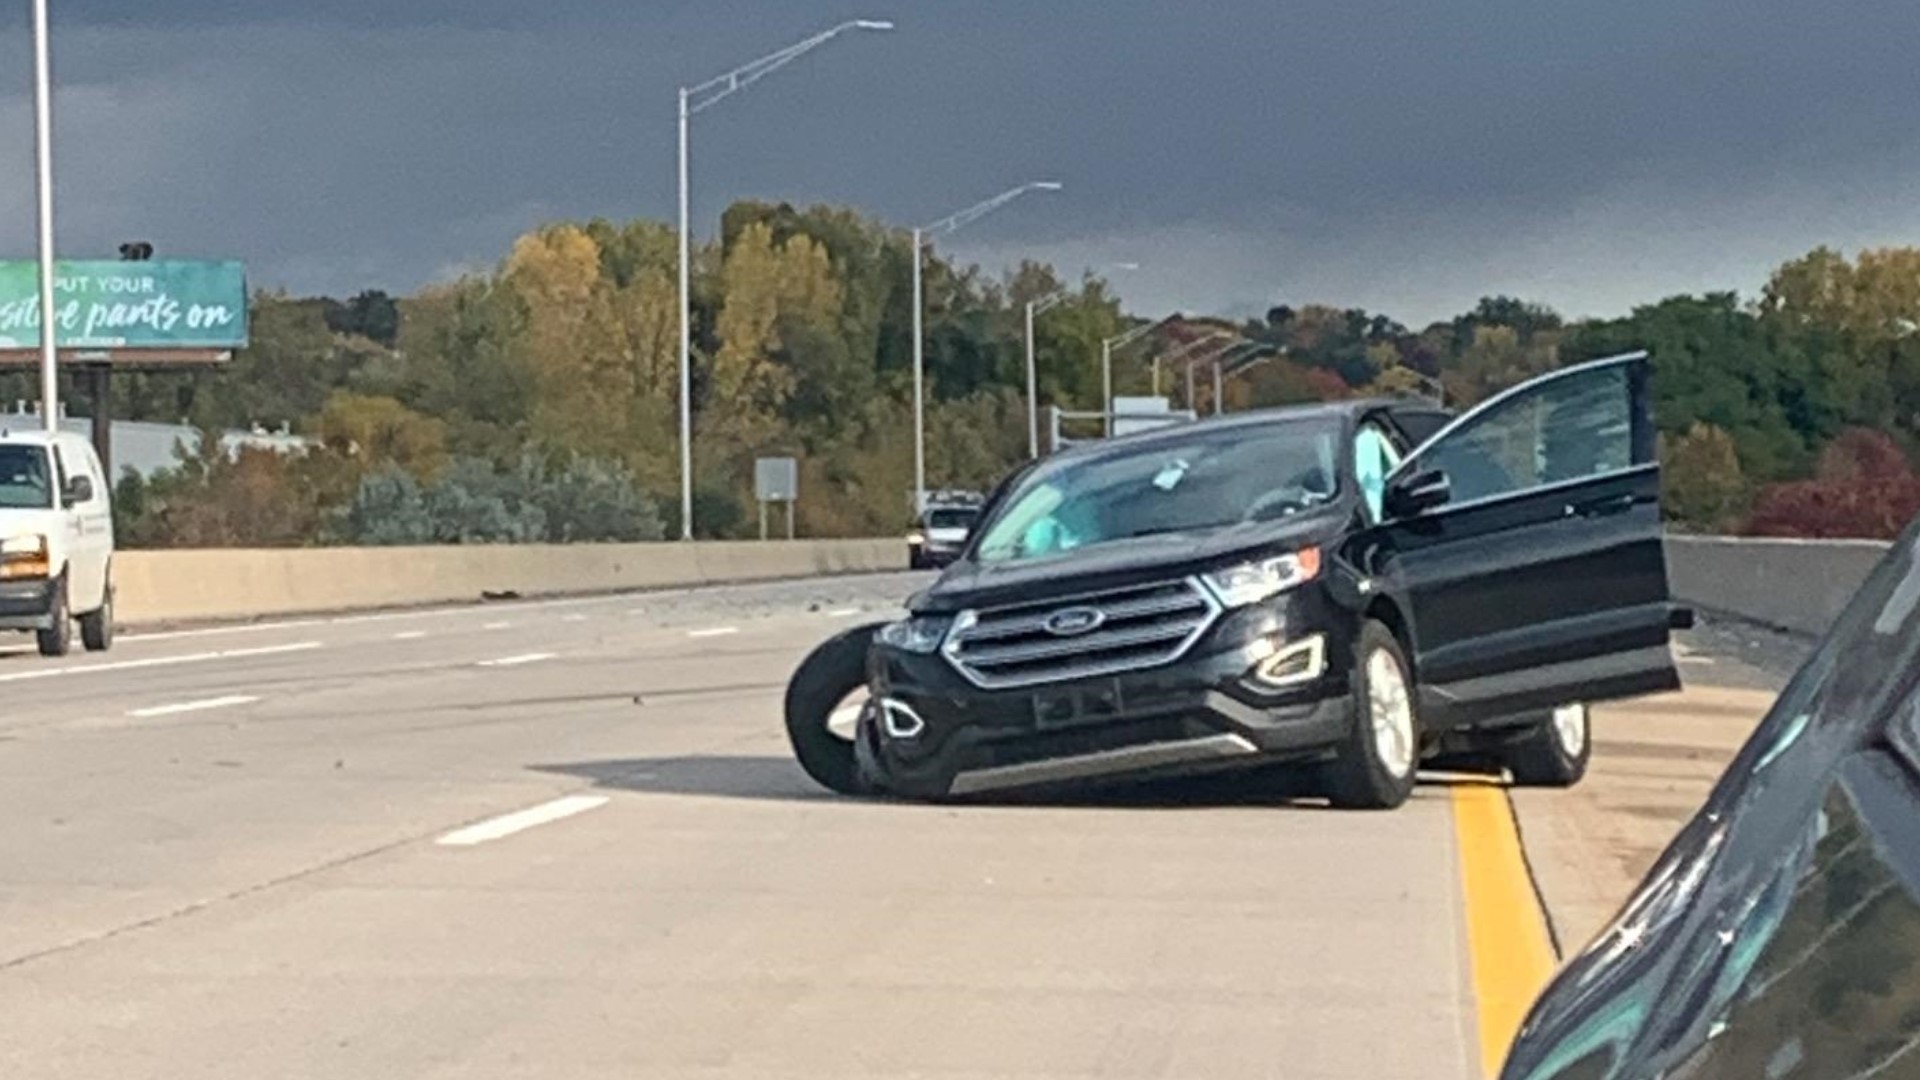 A four-vehicle crash closed parts of US-131 near I-96, police say. The lanes have since reopened.